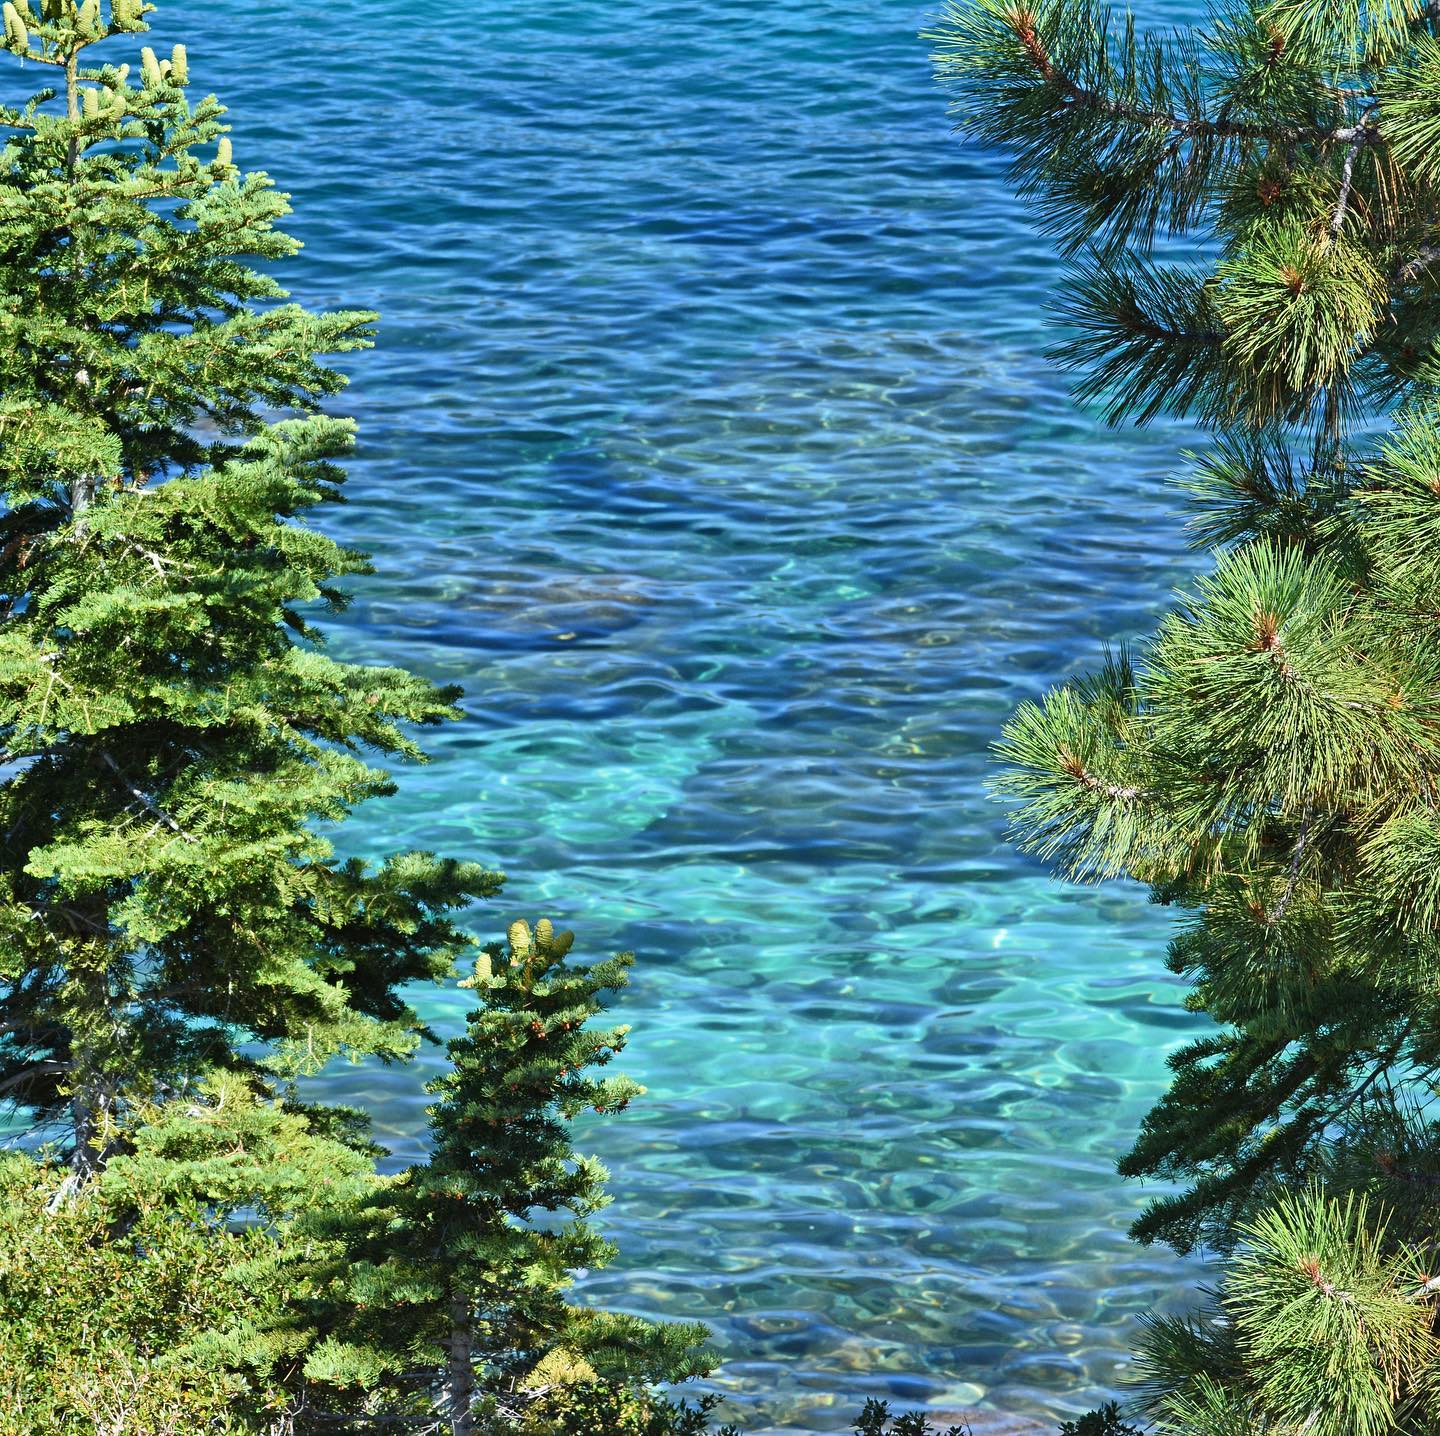 Lake Tahoe is simply breathtaking. The color and clarity of the water is unreal. Positives vibes going out to the brave men and women fighting to protect this gem and its surrounding area and well wishes to those who call Tahoe home. Our thoughts and hearts are with you.

#california #californiatravel #californiaroadtrip #visitcalifornia #roadtrip #travelphotography #tahoe #laketahoe #scenicdrive #coastalcalifornia #californiacoast #californiadreaming #cafires #californiafires #caldorfire